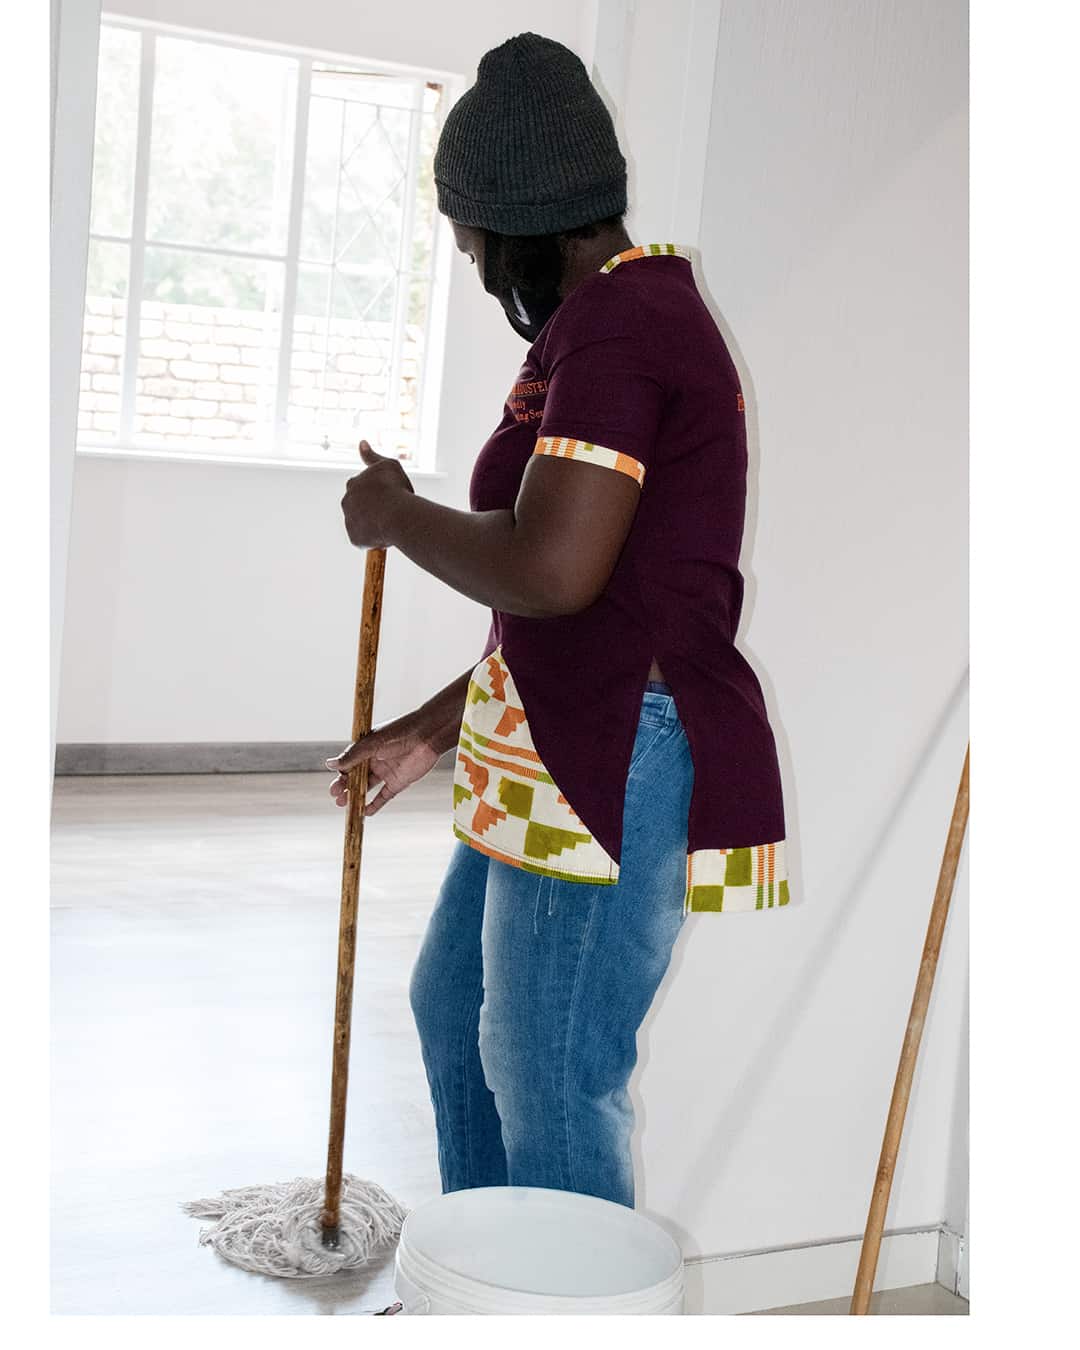 house cleaning services KRUGERSDORP